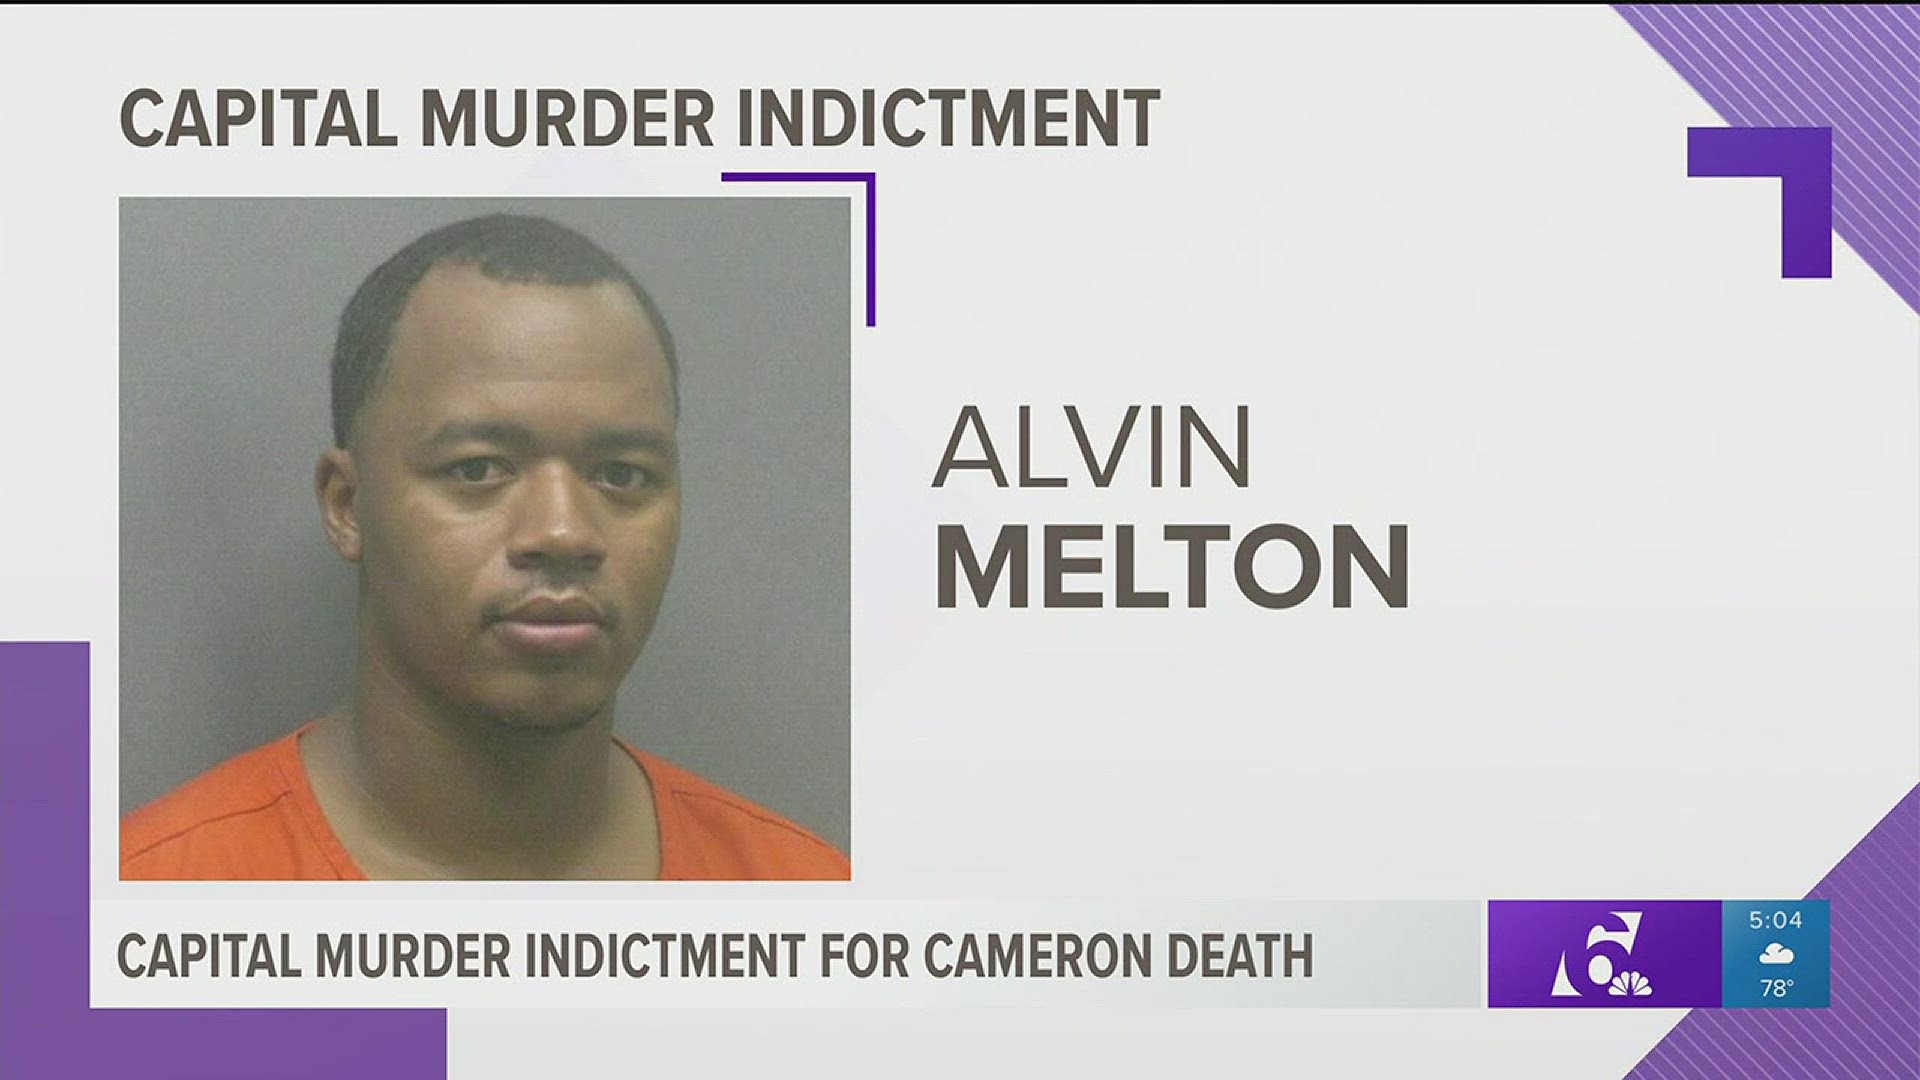 A Cameron man is now indicted on Captial Murder charges for a shooting that left one person dead.